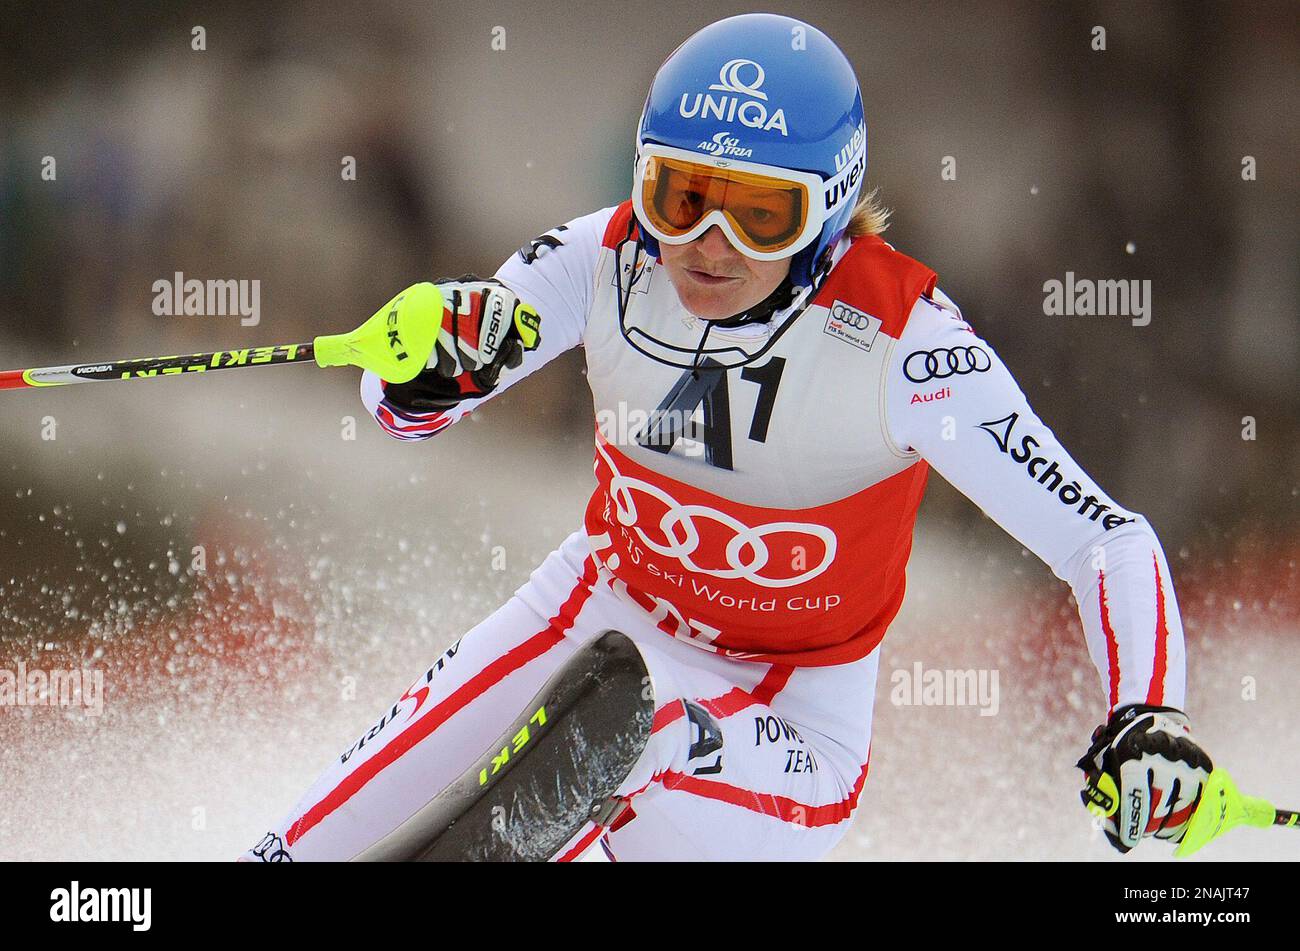 Marlies Schild, of Austria, slaloms past a pole on her way to set the fastest time during the first run of an alpine ski, womens World Cup slalom, in Lienz, Austria, Thursday,